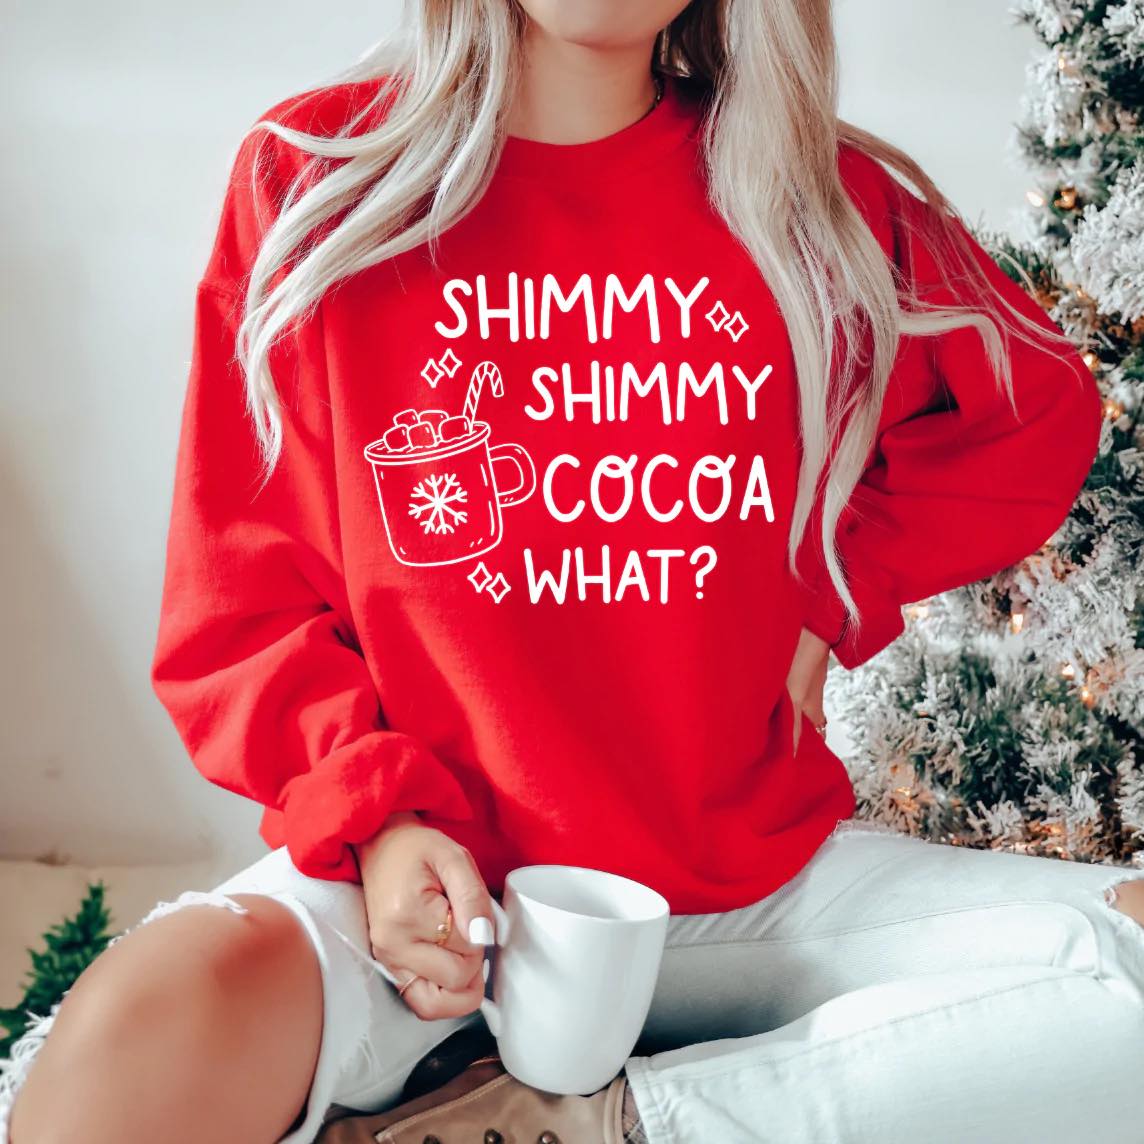 Shimmy Shimmy Cocoa What?